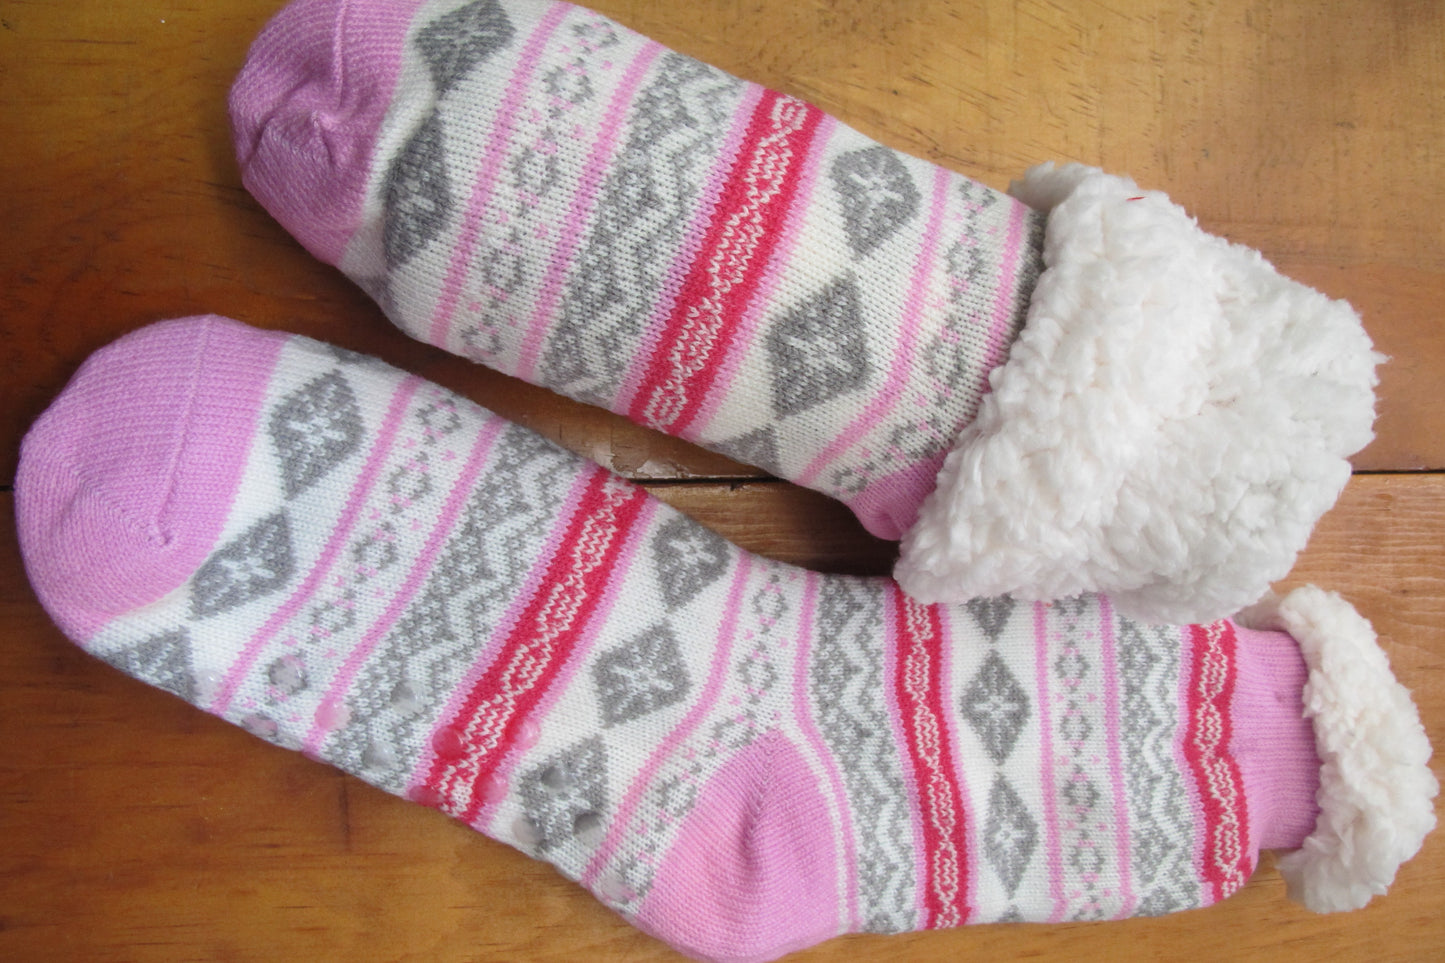 Sherpa-Lined Cabin Socks - Pink and Grey snowflake/ faireisle design